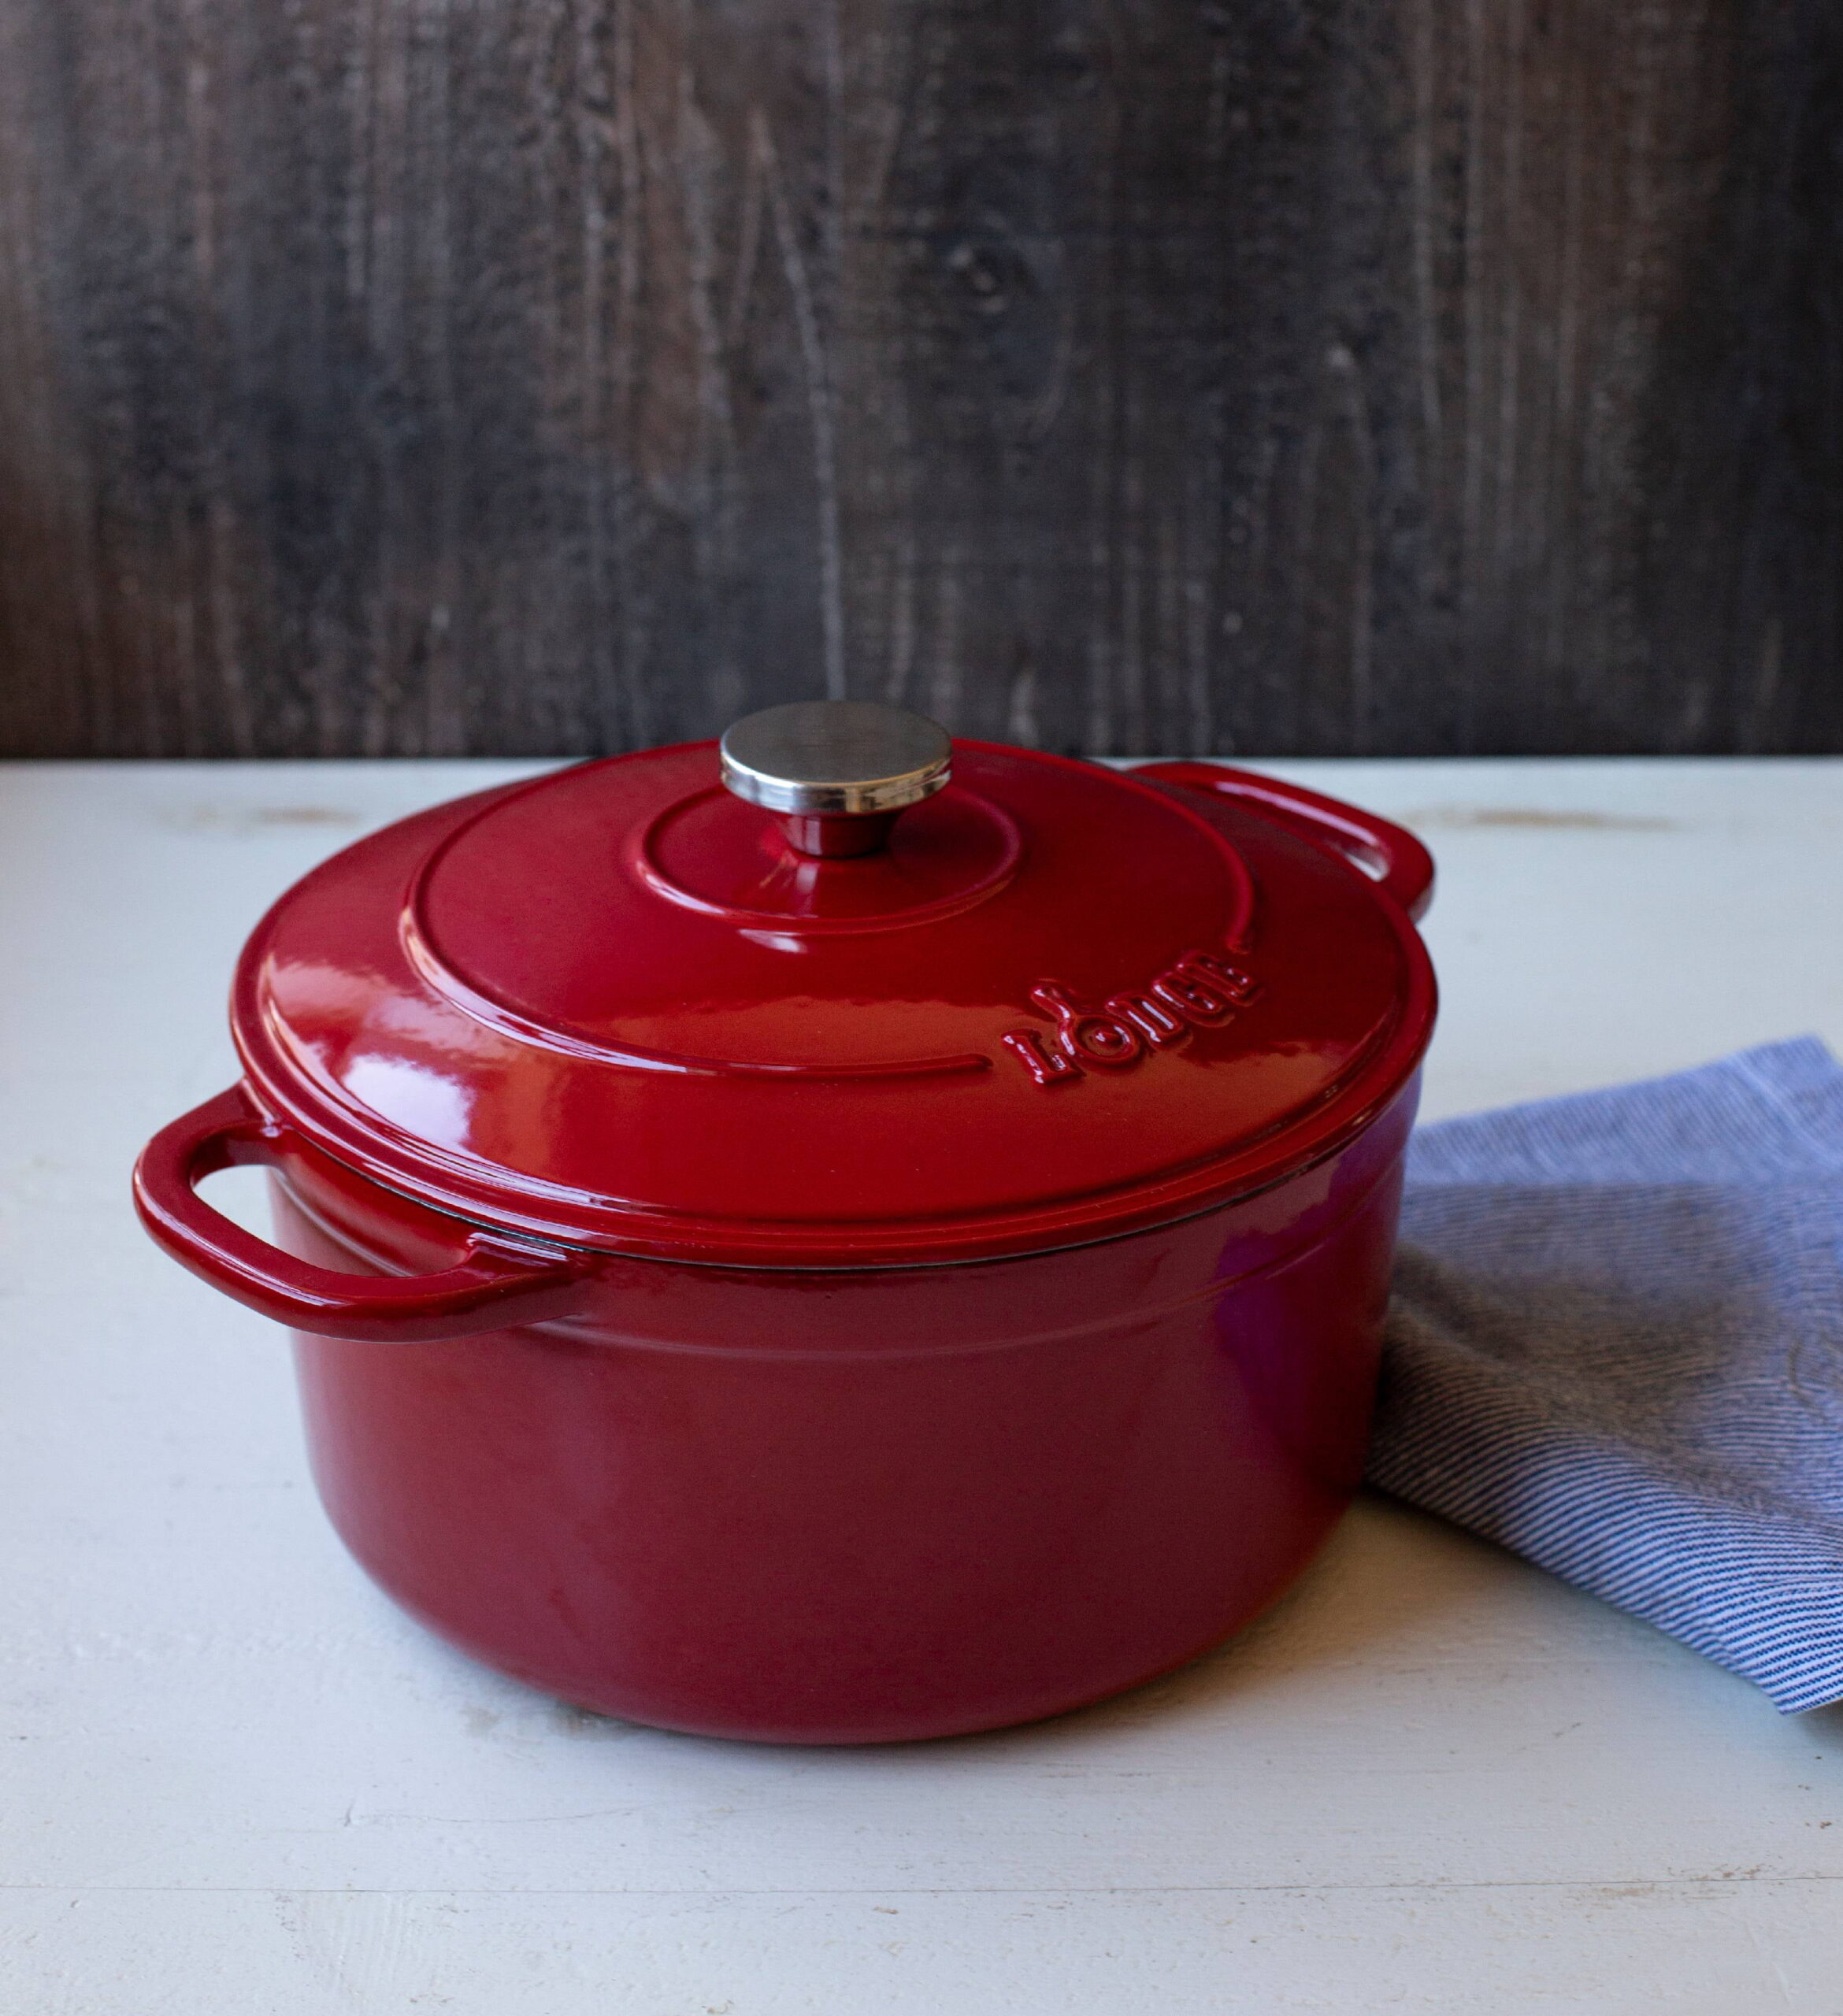 Lodge Enamelware 6 qt. Round Cast Iron Dutch Oven in Oyster White